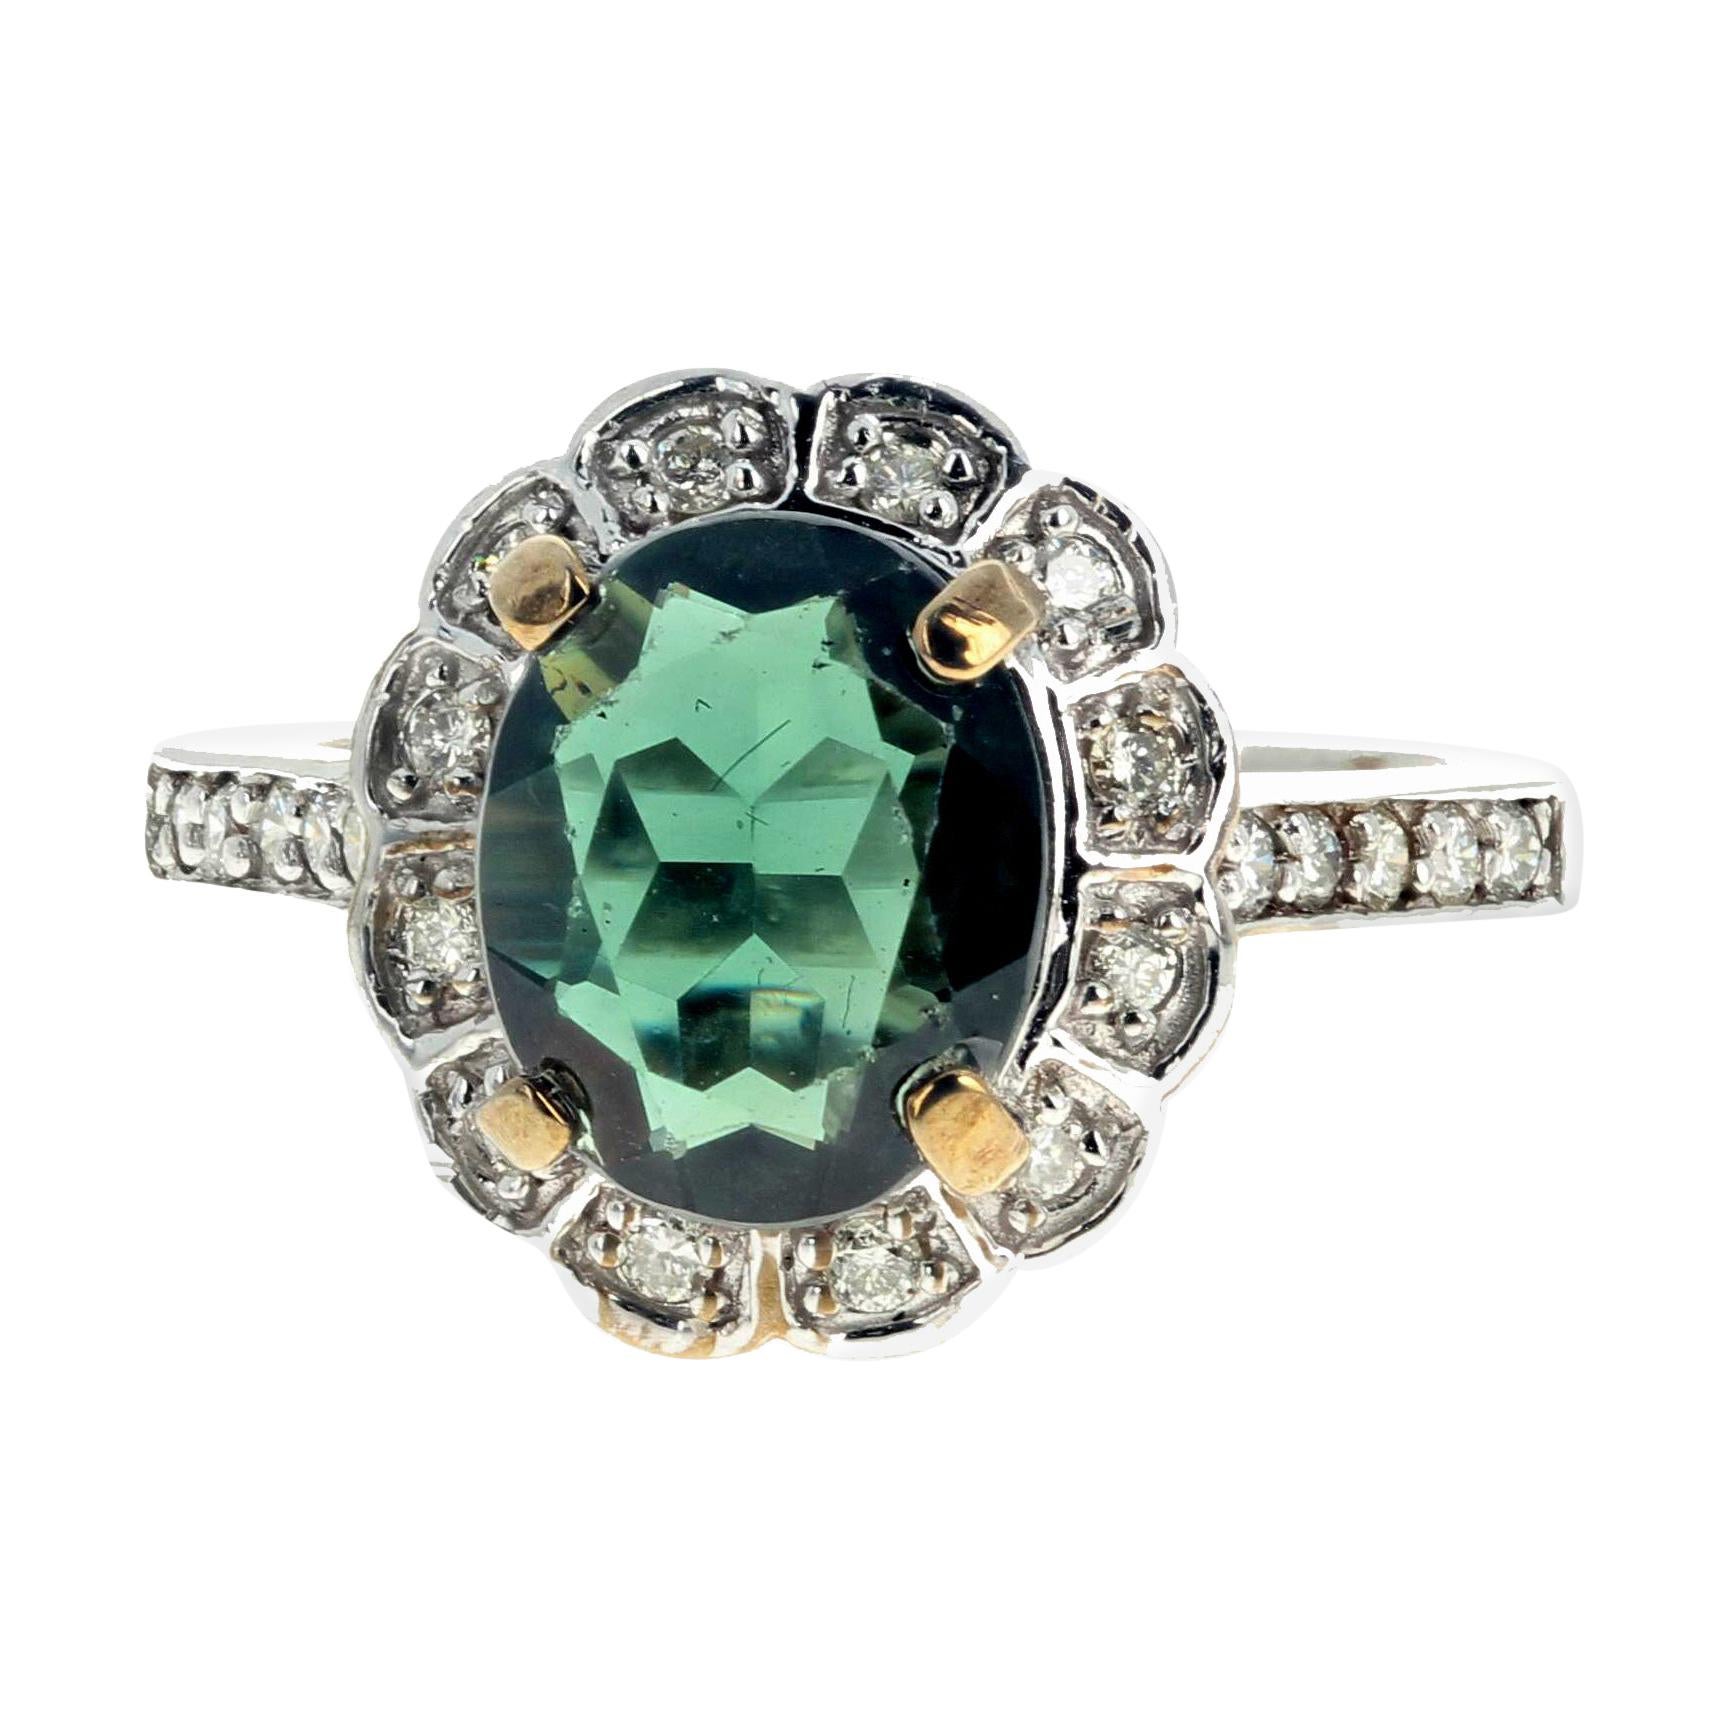 AJD Intensely Glowing 2.23 Ct Green Apatite & White Diamonds Ring